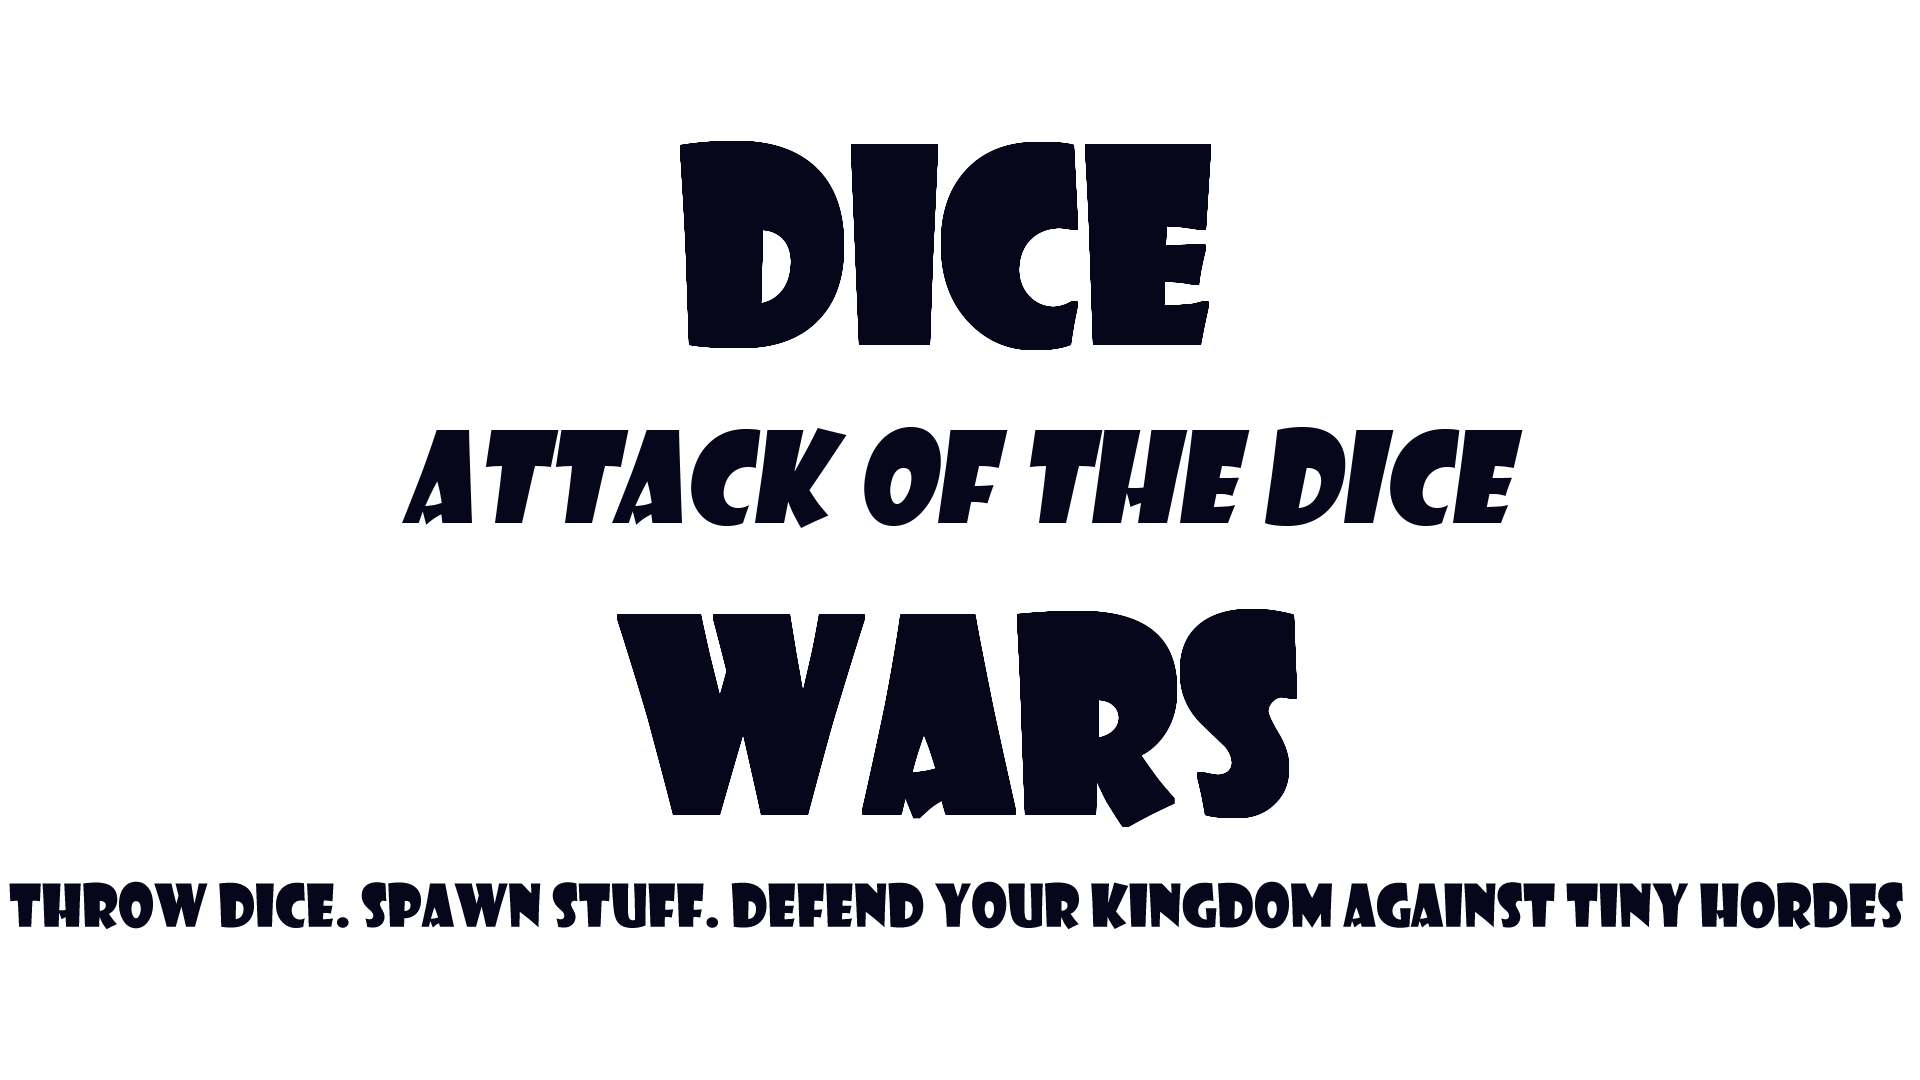 Dice Wars: Attack of the Dice